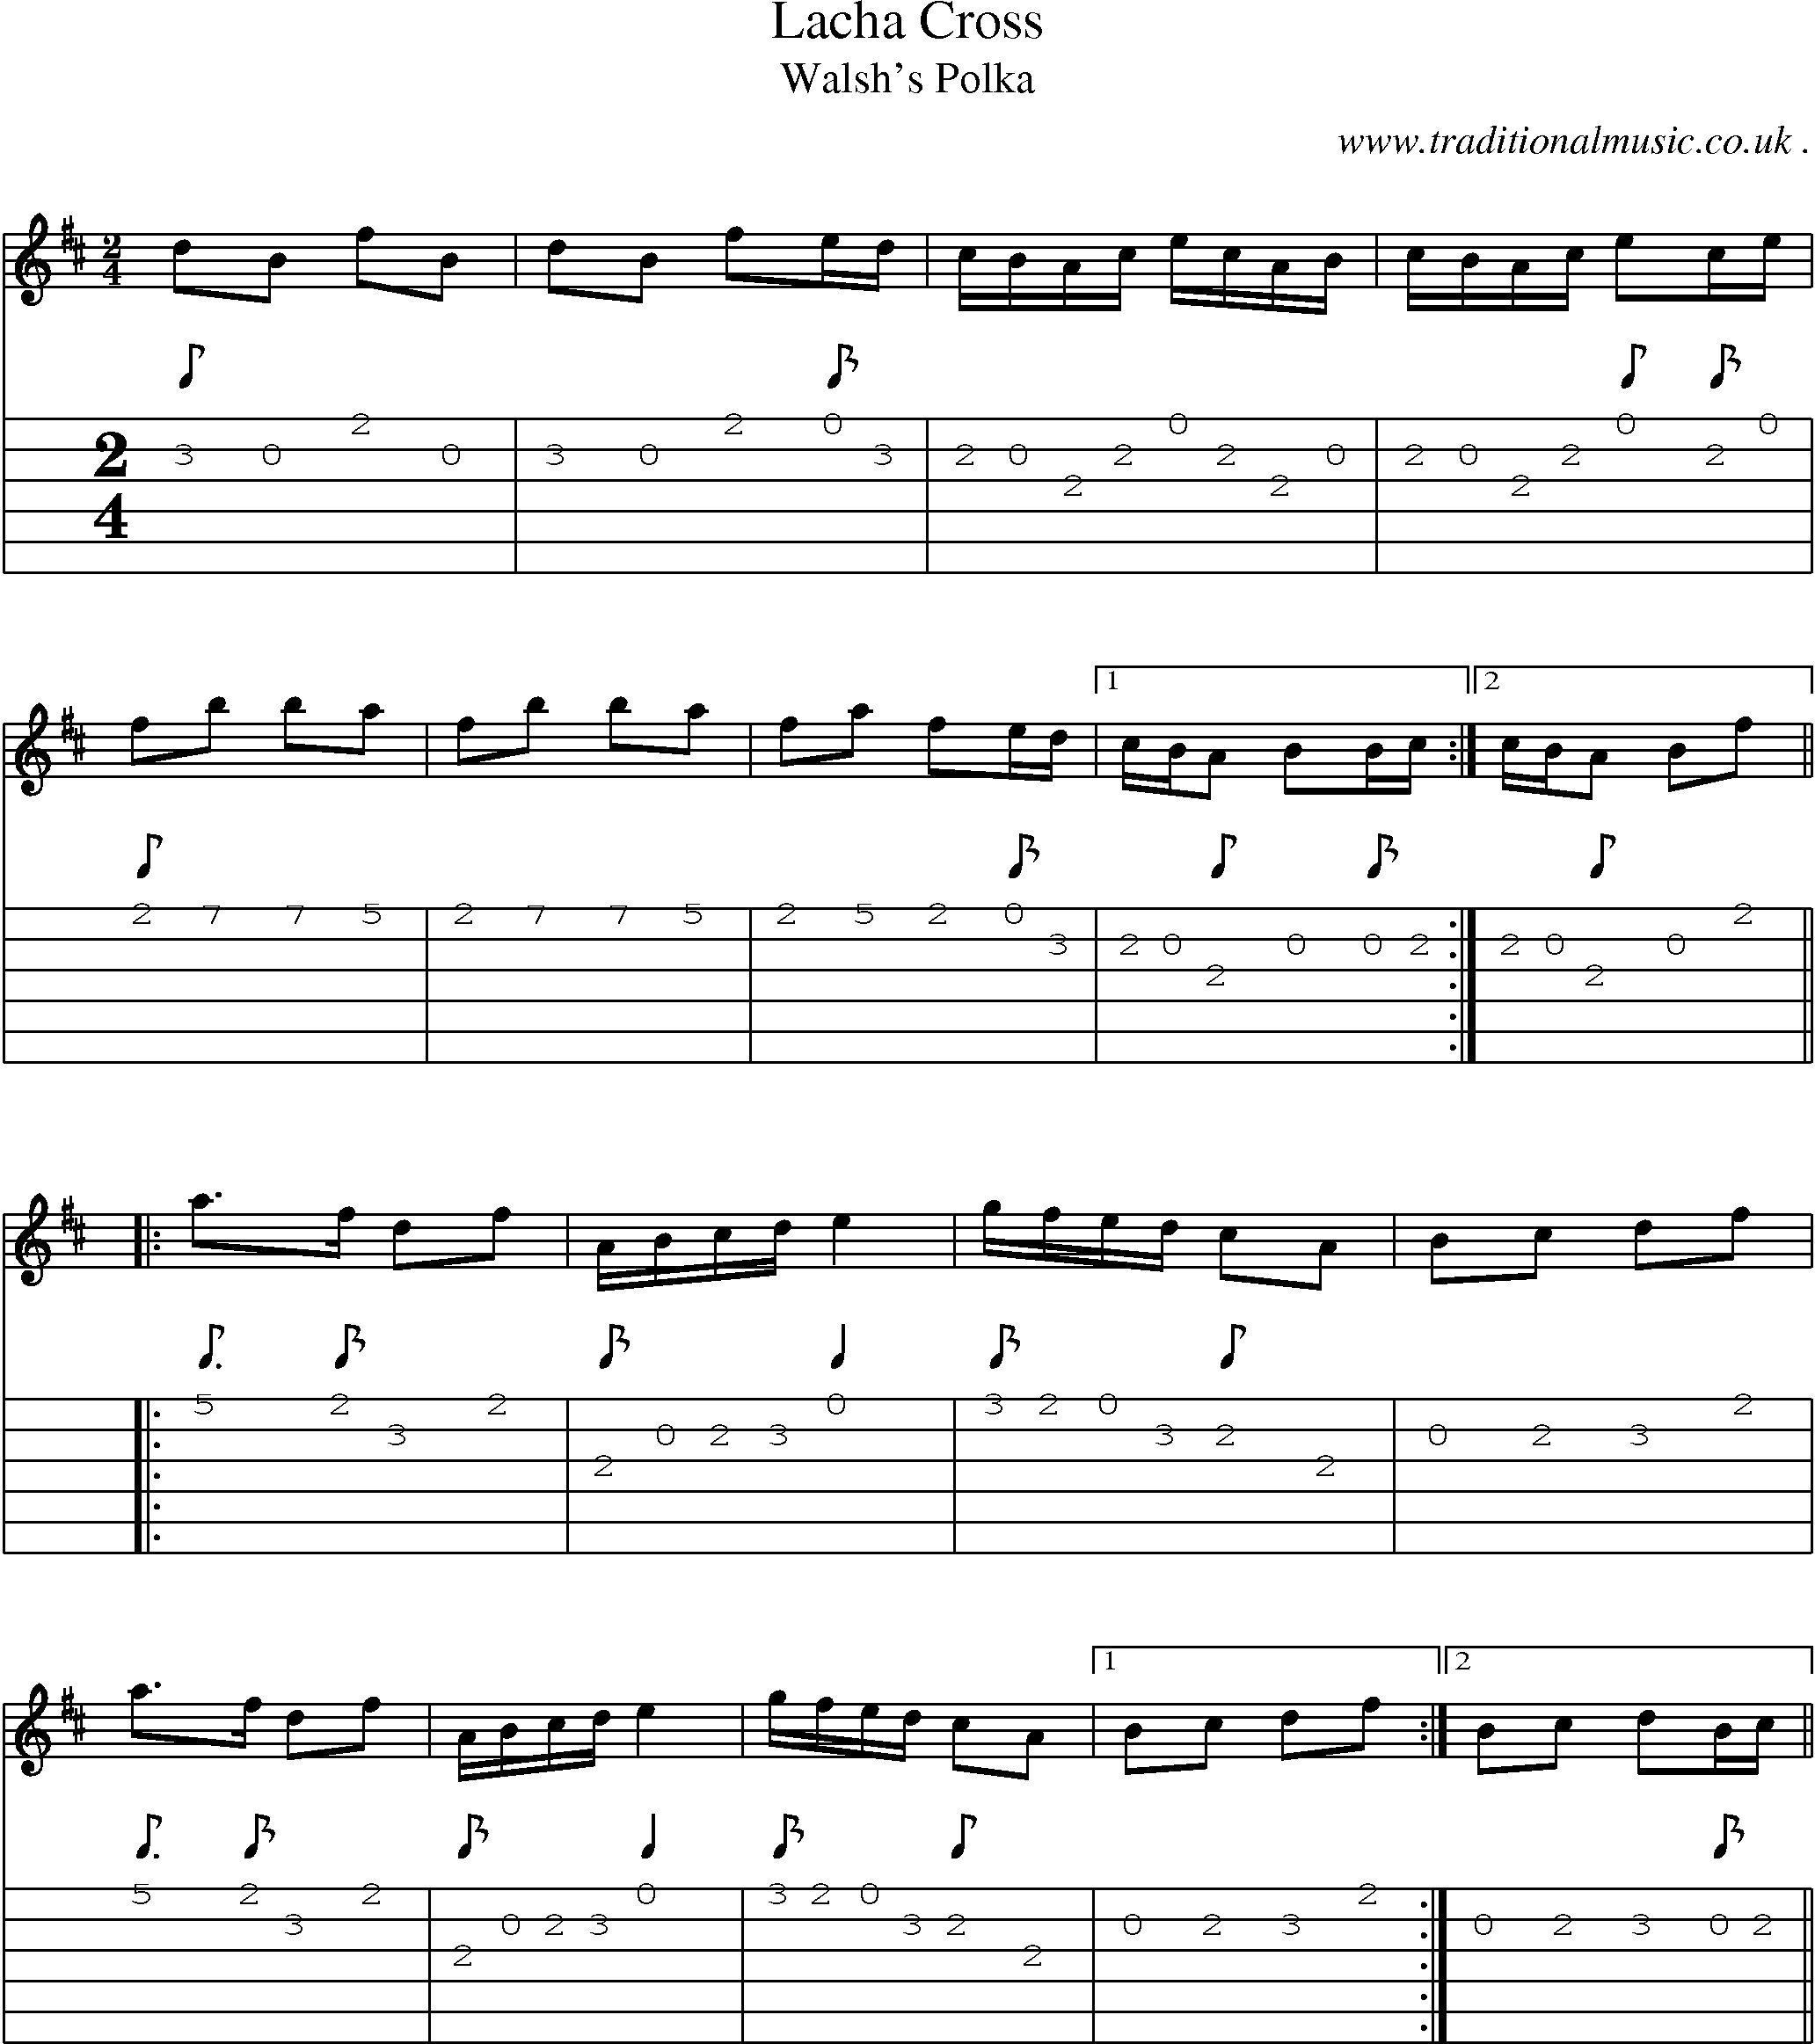 Sheet-Music and Guitar Tabs for Lacha Cross